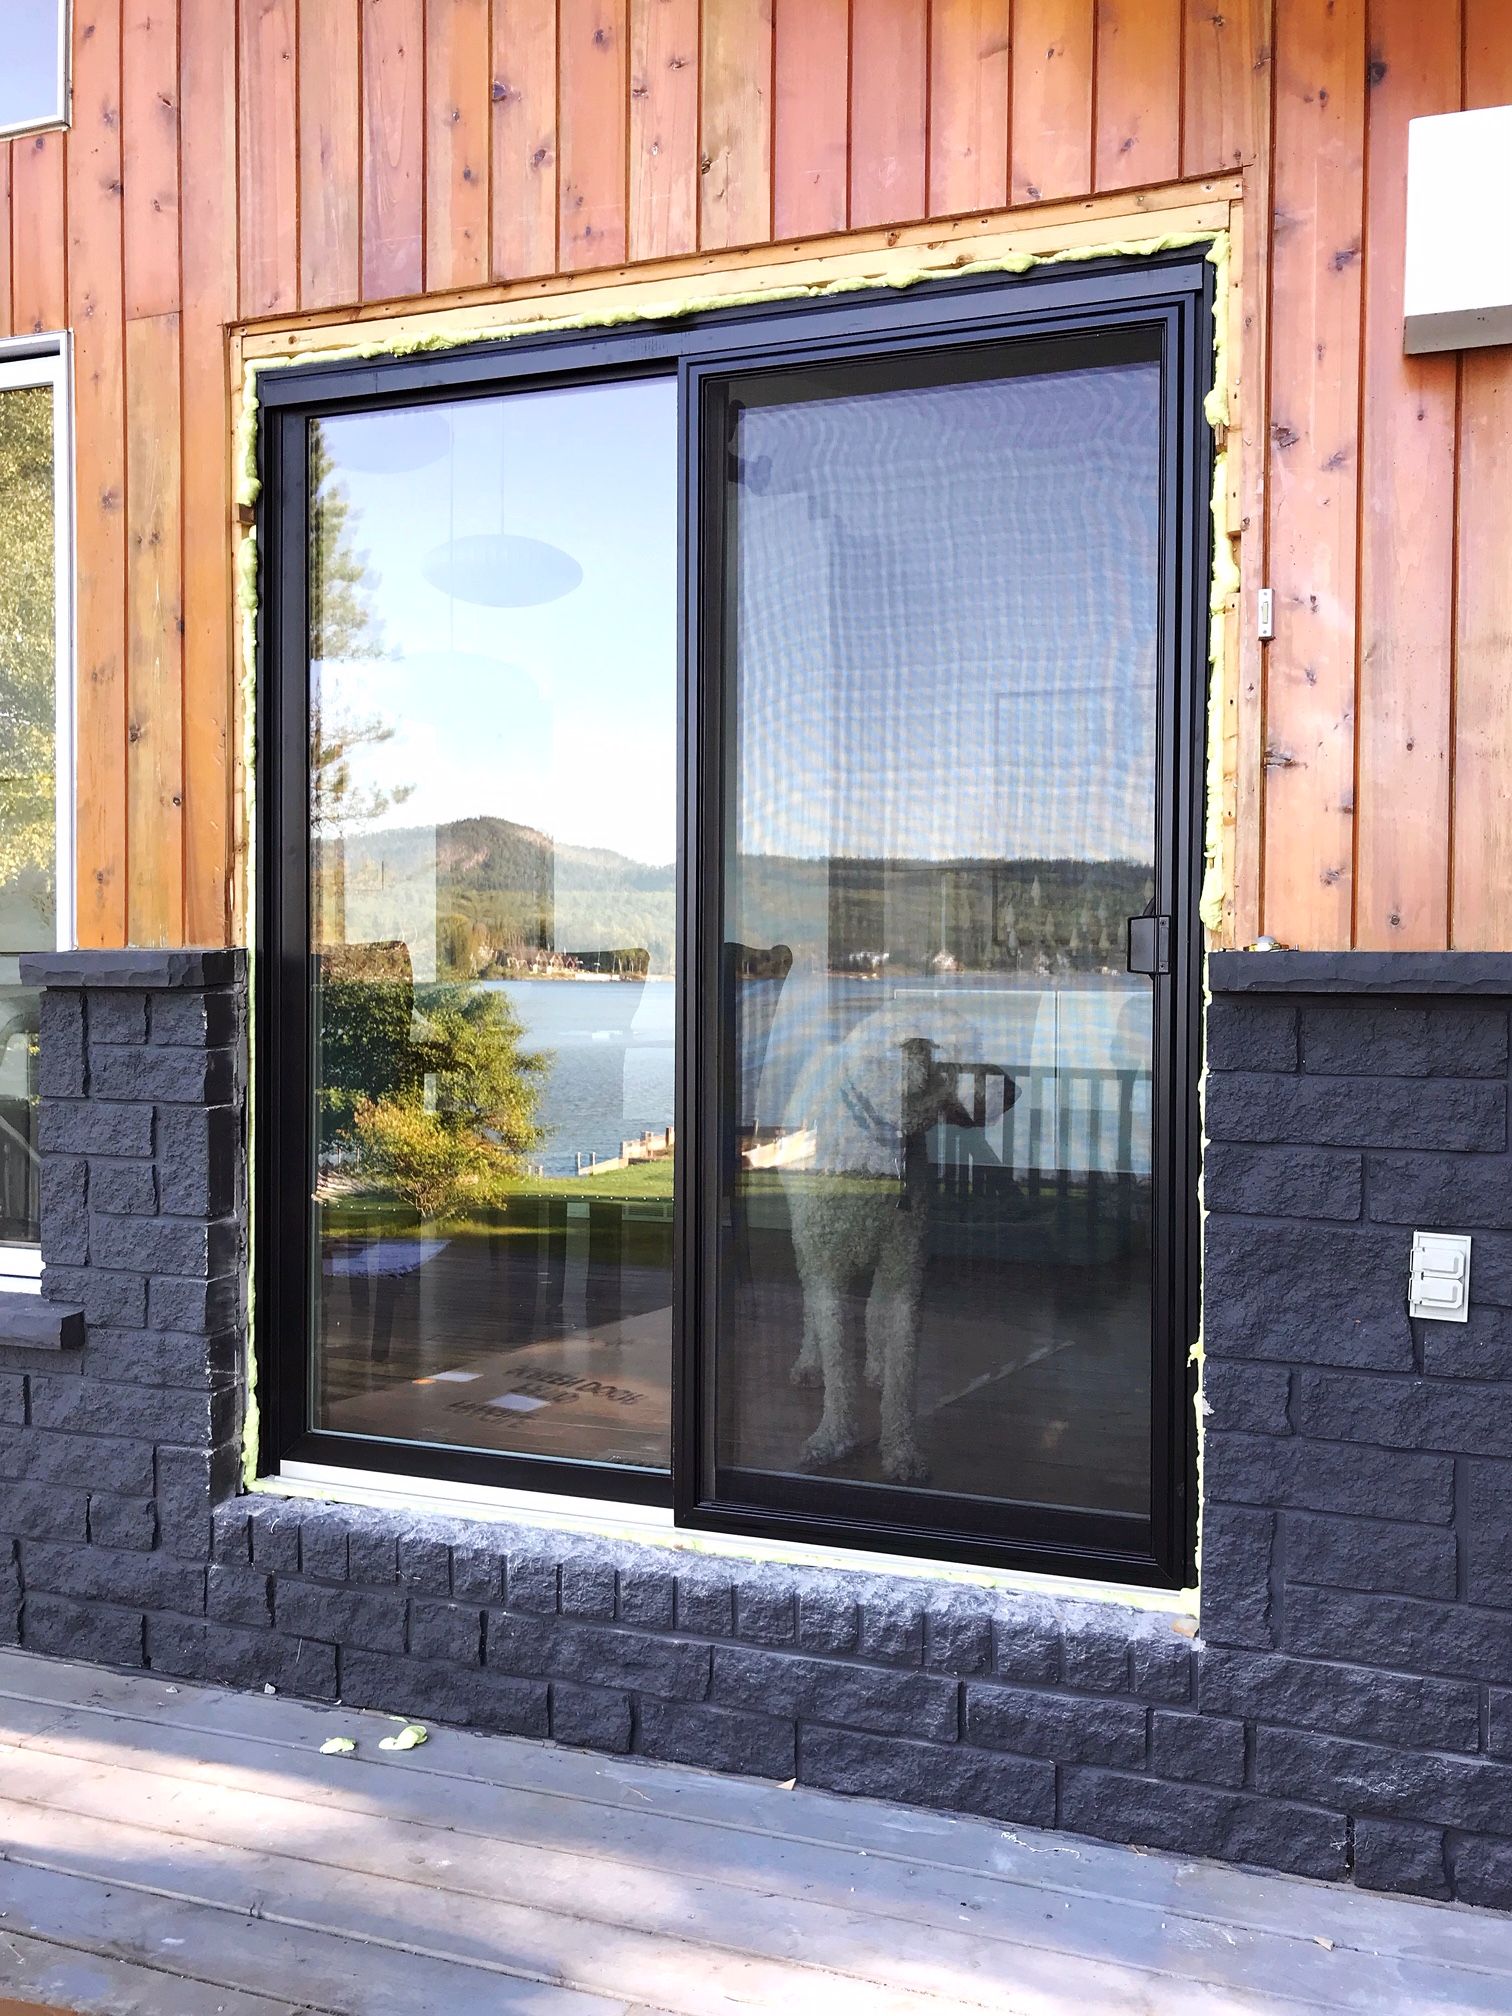 Why We Changed Our Patio Doors + Why I Now Think Garden Doors Are Better Than Sliding Patio Doors | Dans le Lakehouse